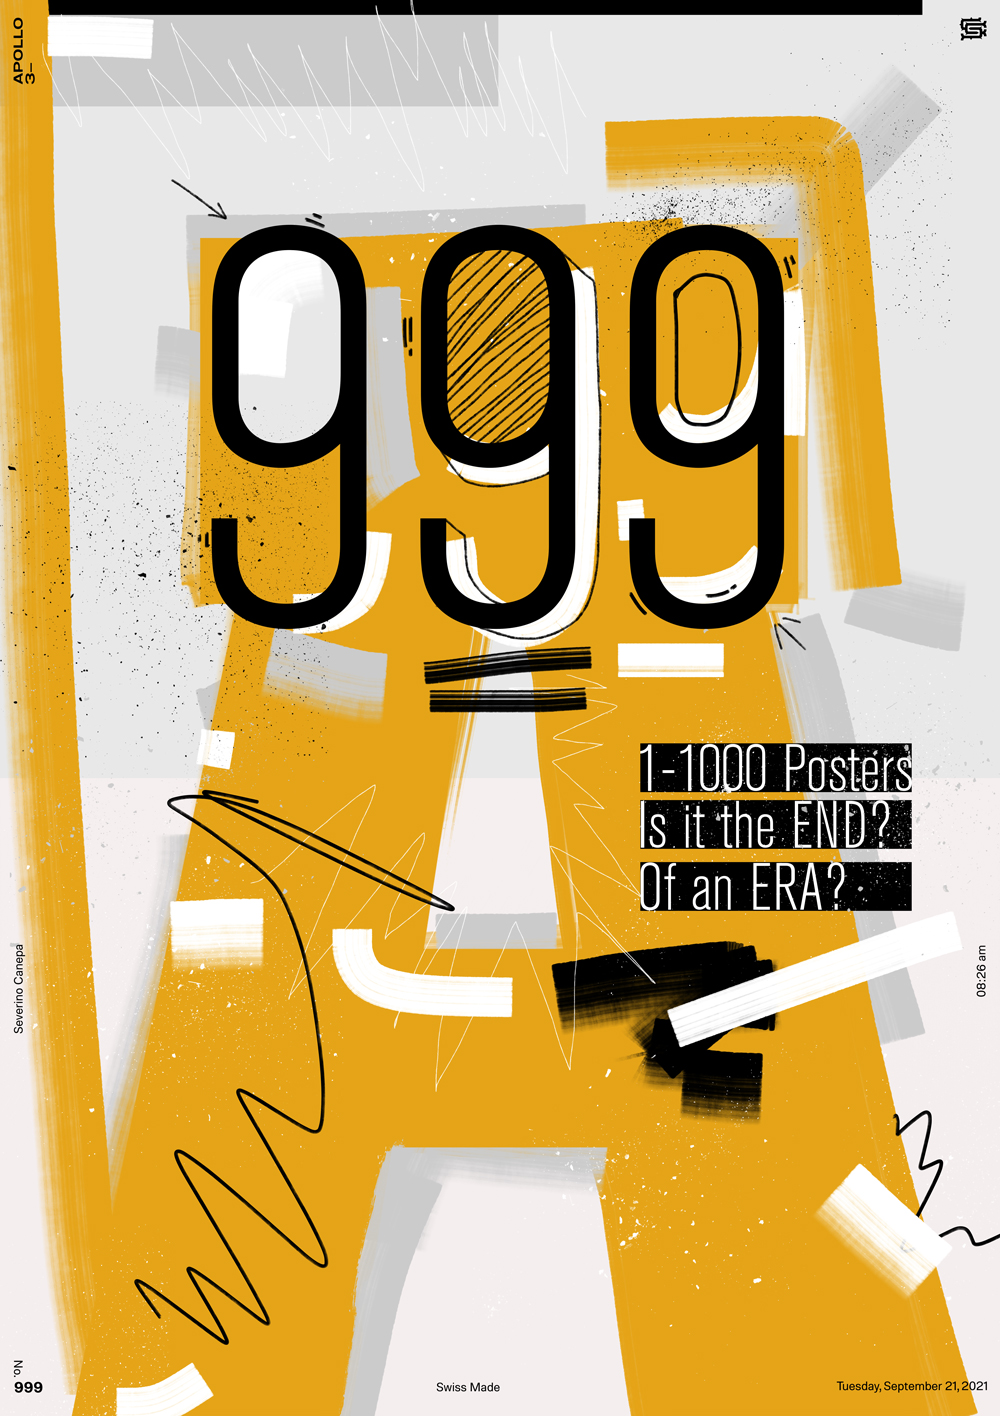 Celebration design made about the number 999